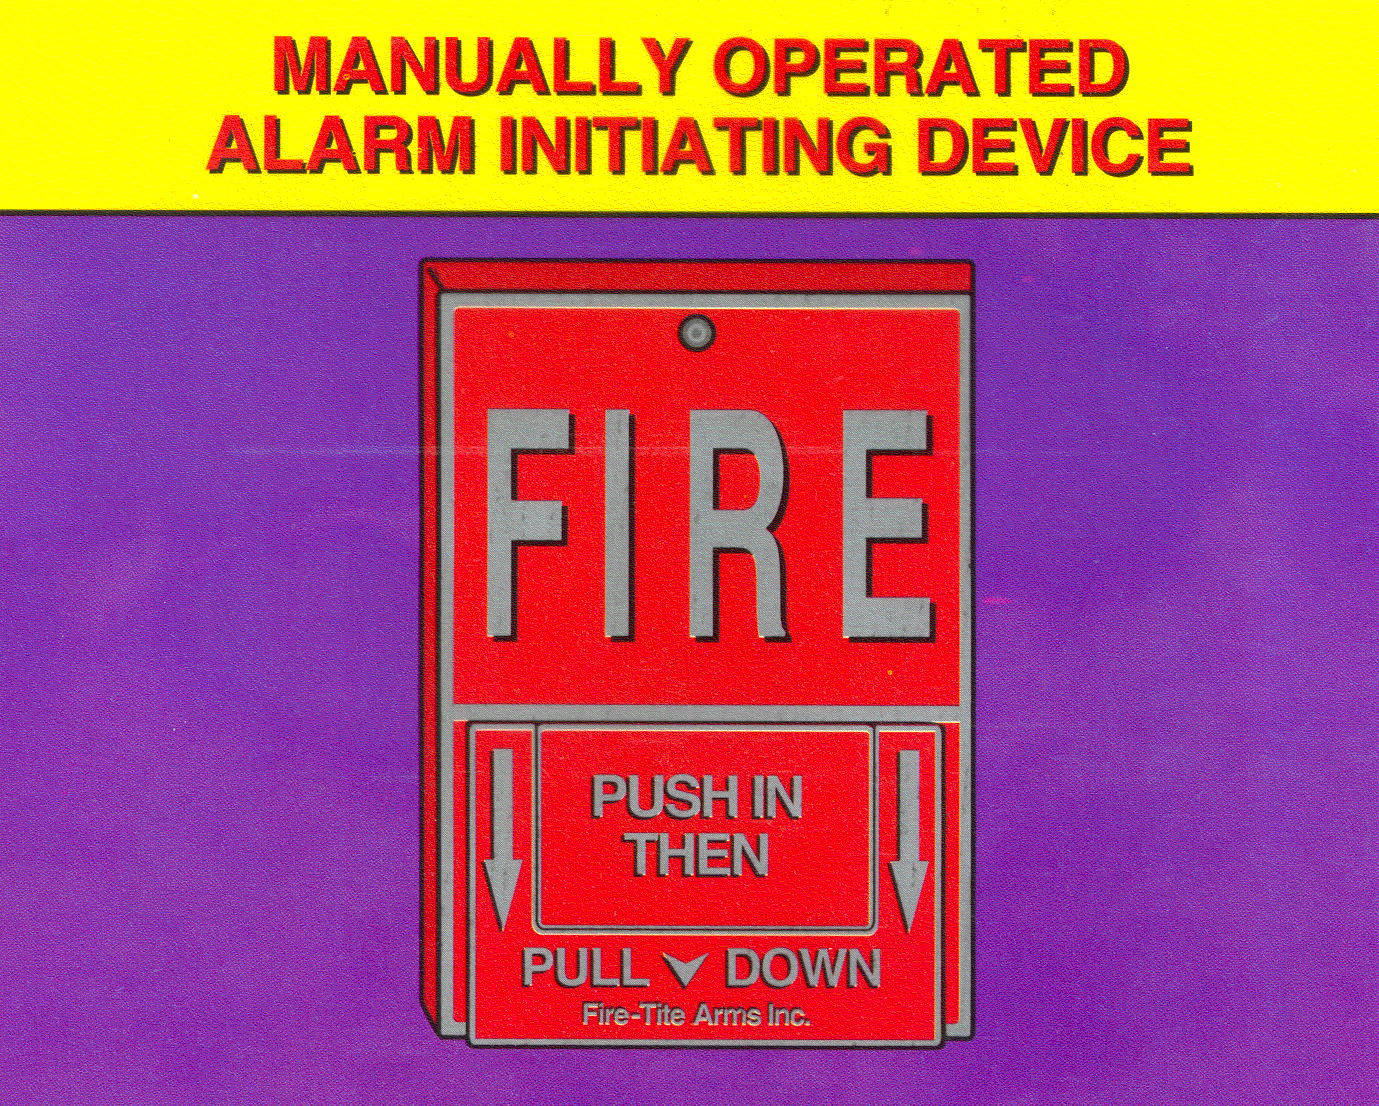 Manually Operated Alarm Initiation device